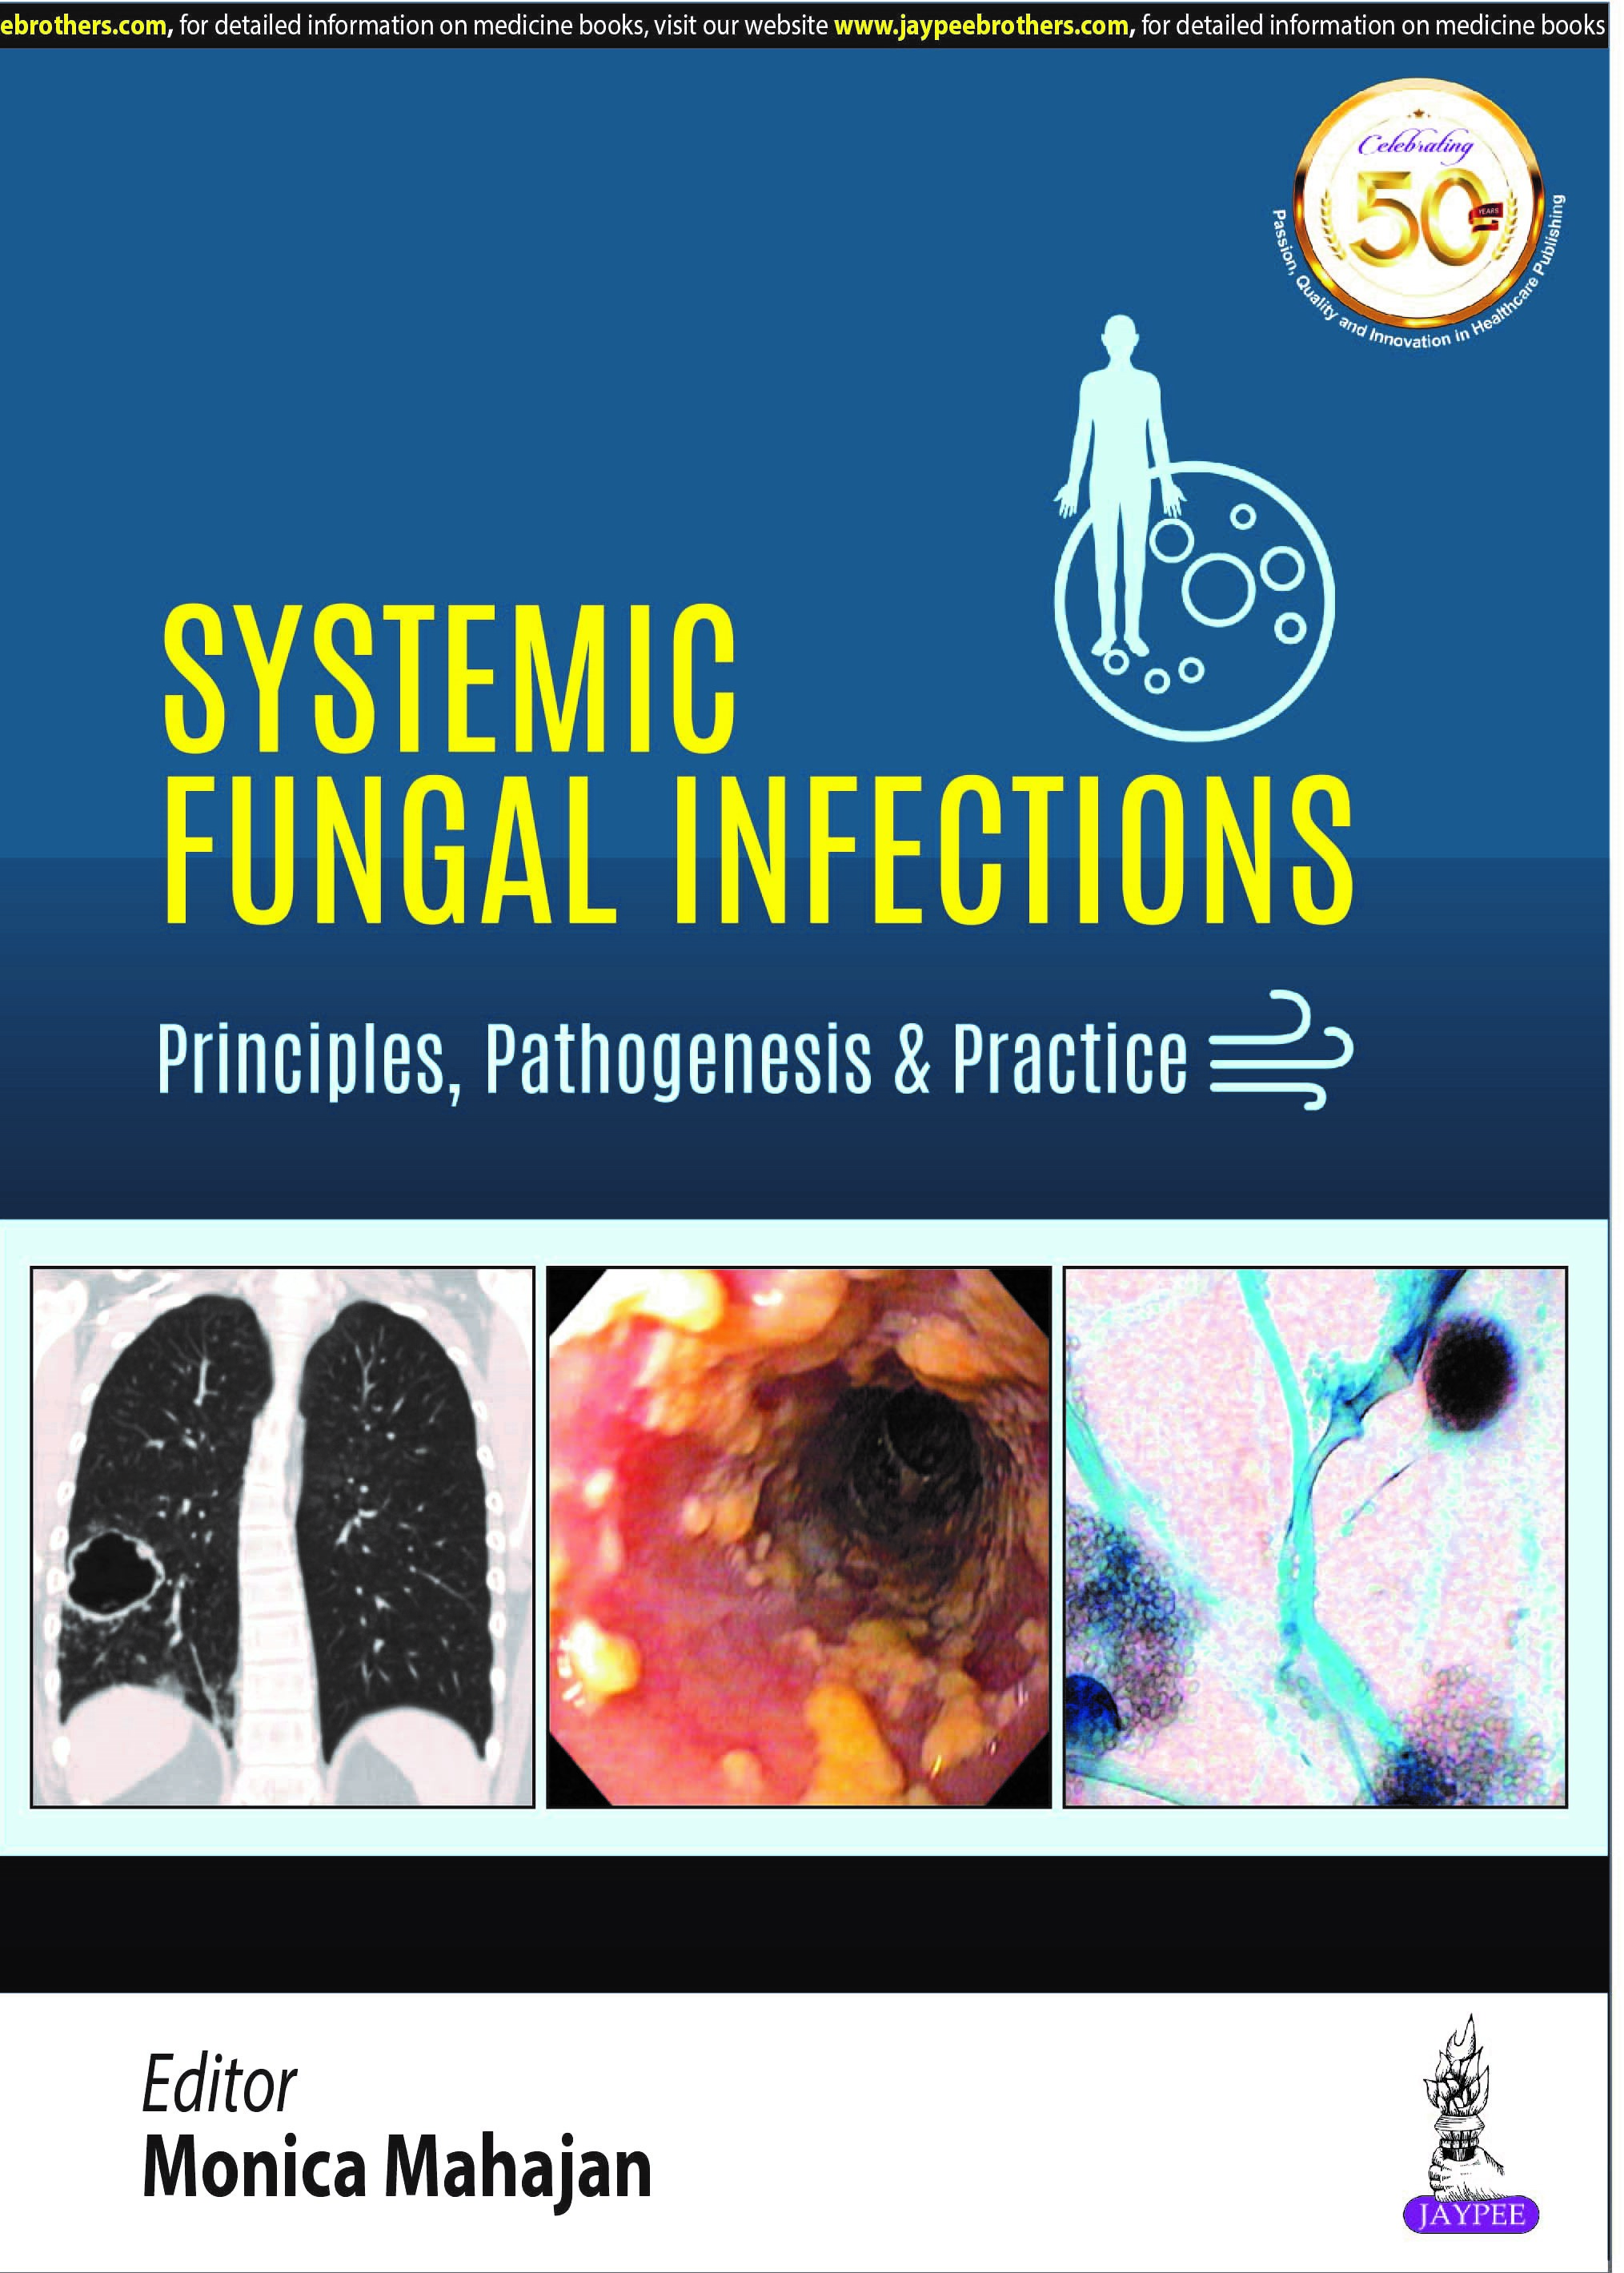 Systemic Fungal Infections: Principles, Pathogenesis & Practice
